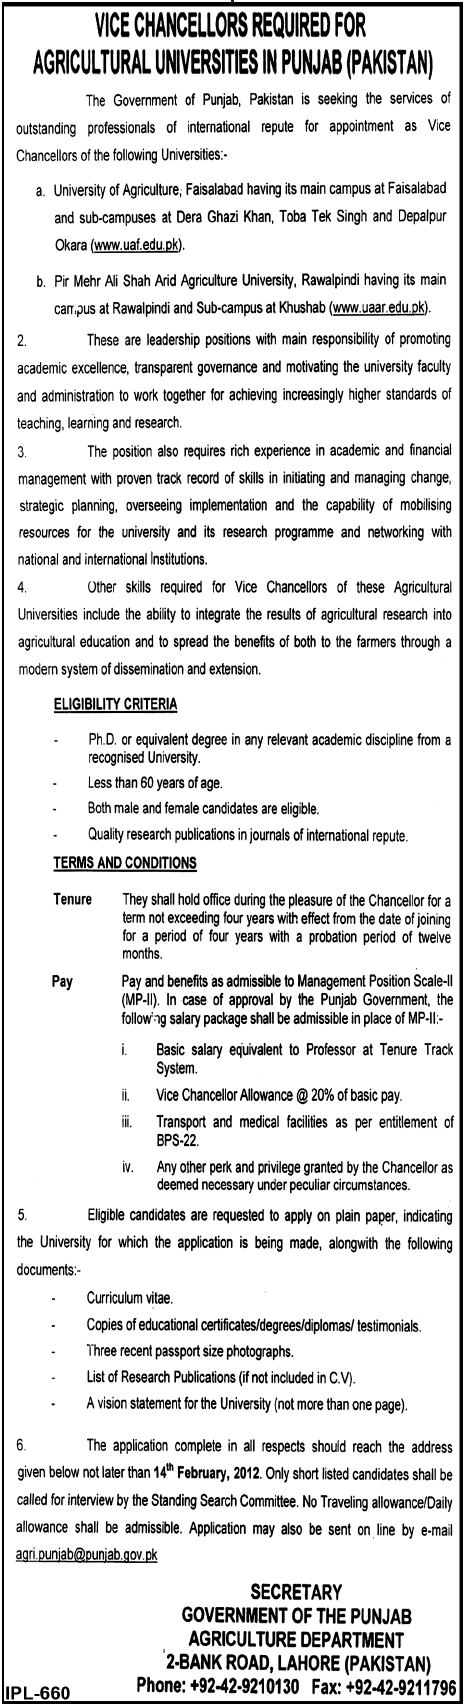 Vice Chancellors Required for Agricultural Universities in Punjab (Pakistan)